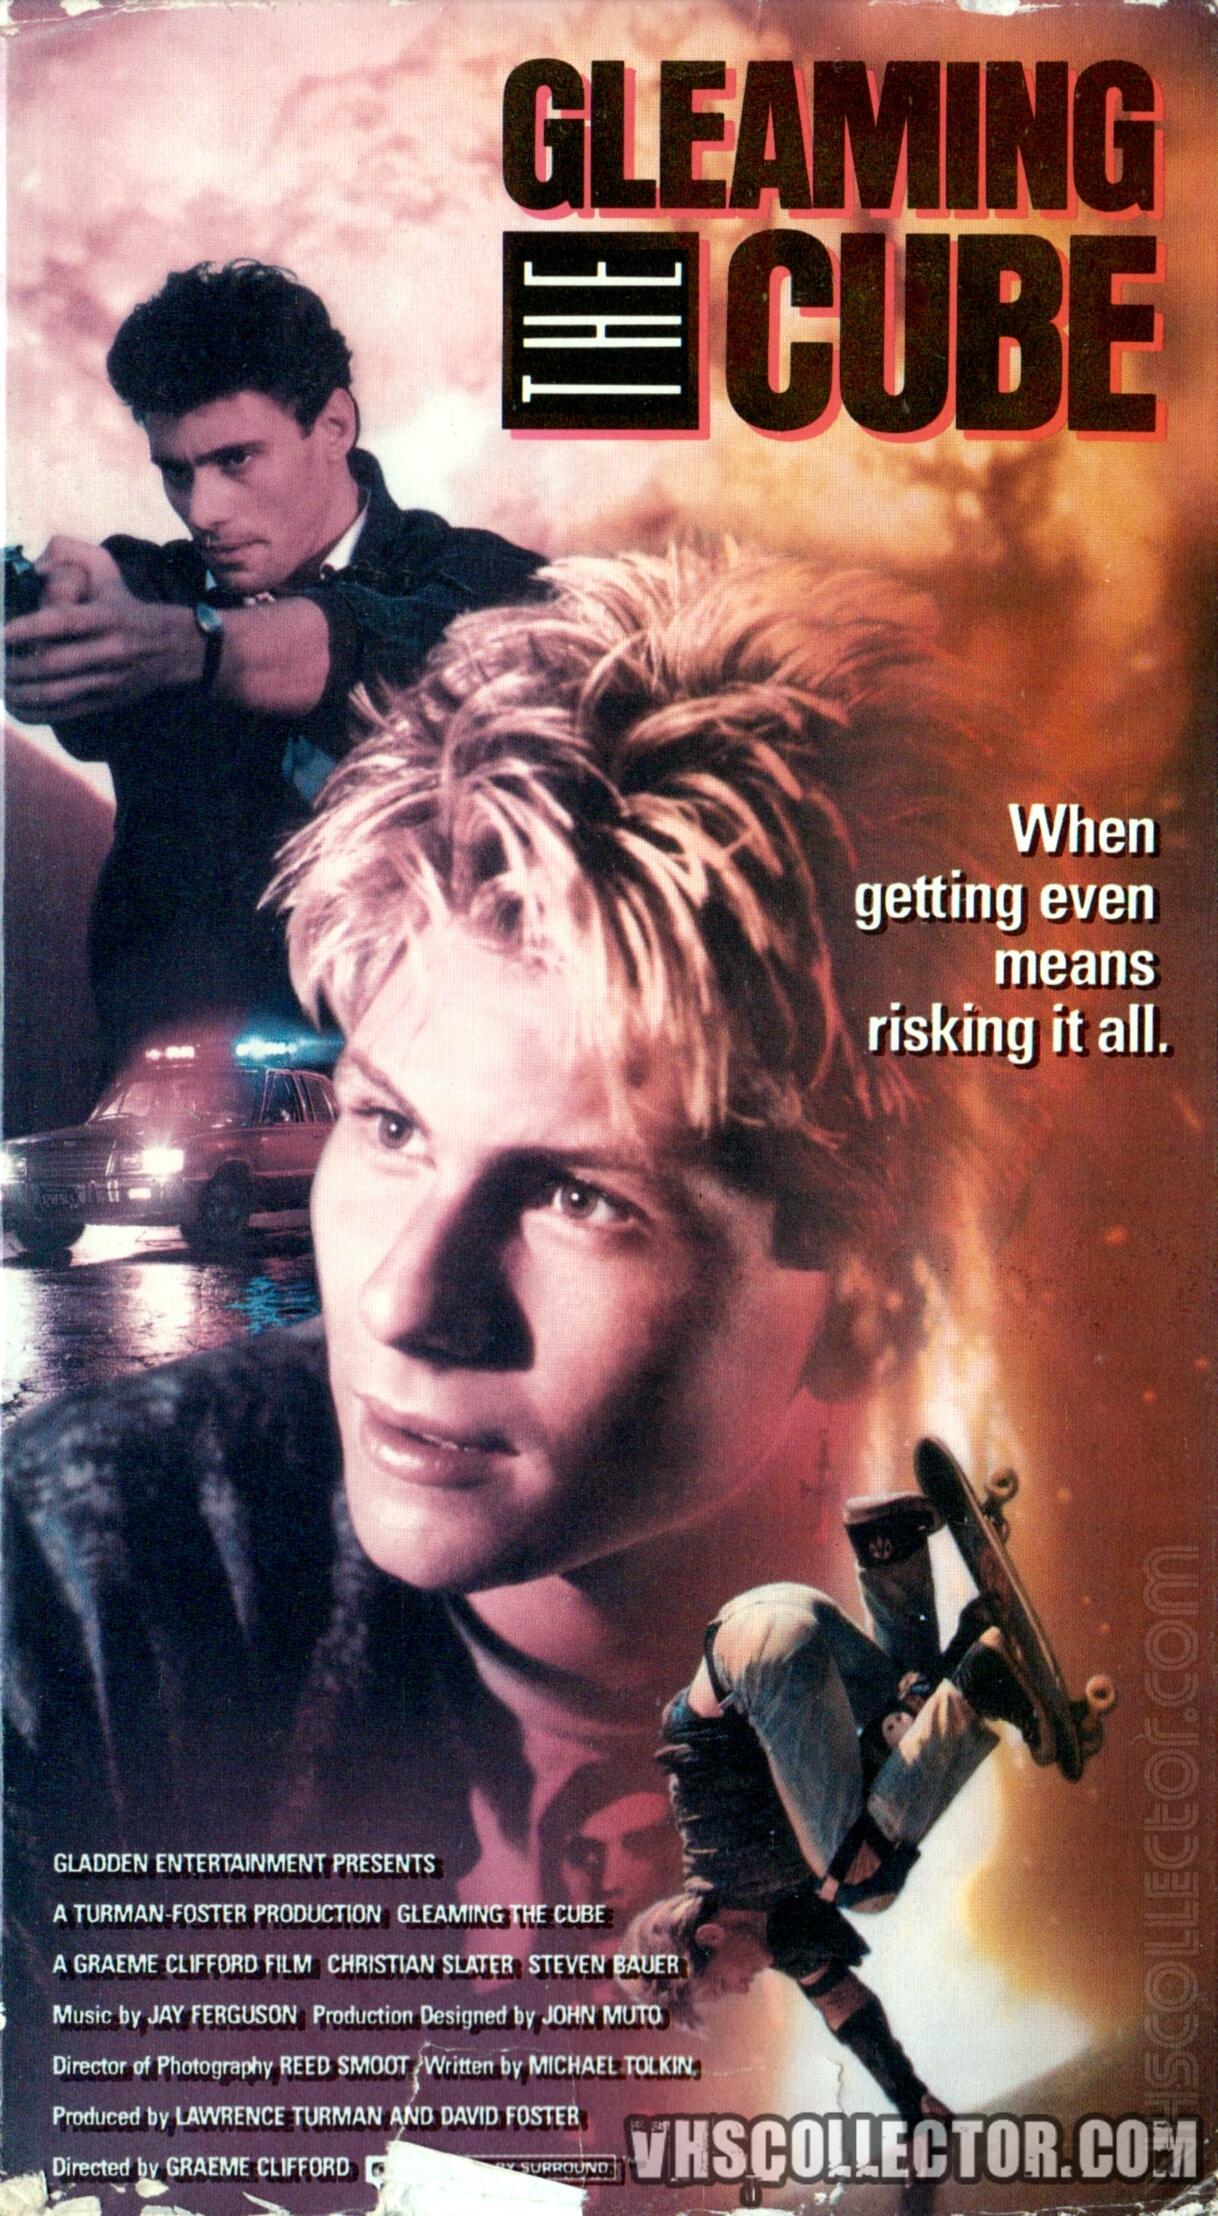 Gleaming the Cube | VHSCollector.com